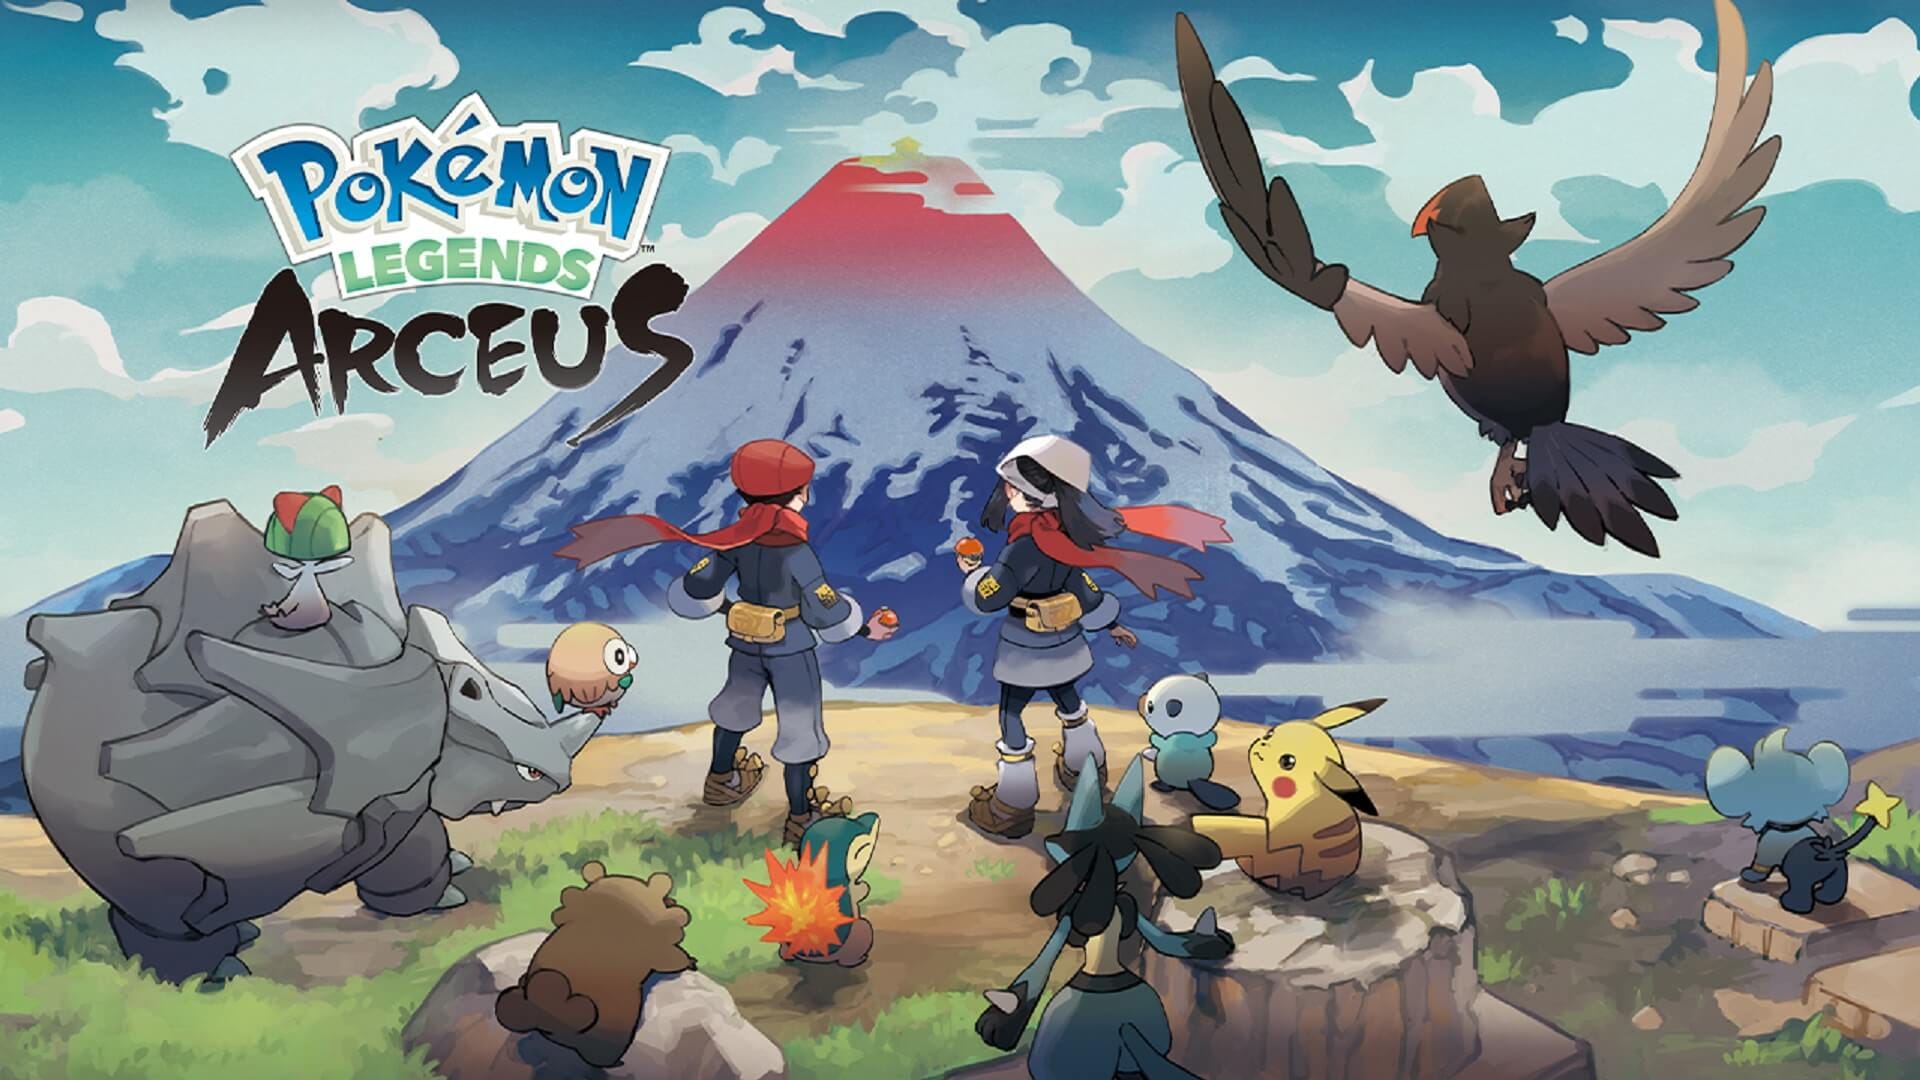 We're so excited for the Pokemon Legends - Arceus that we're